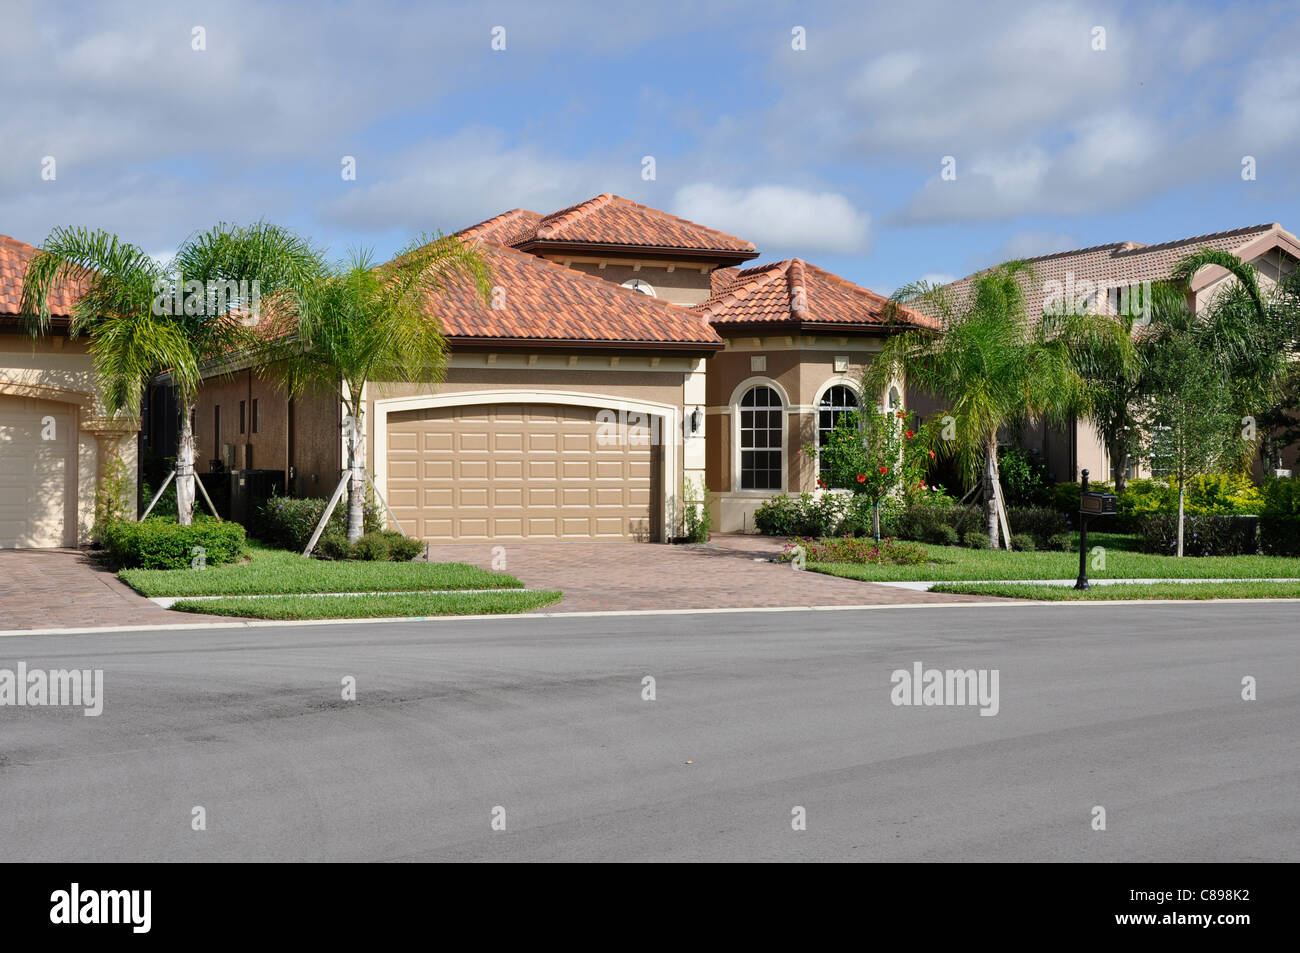 Typical single family home in Florida Stock Photo